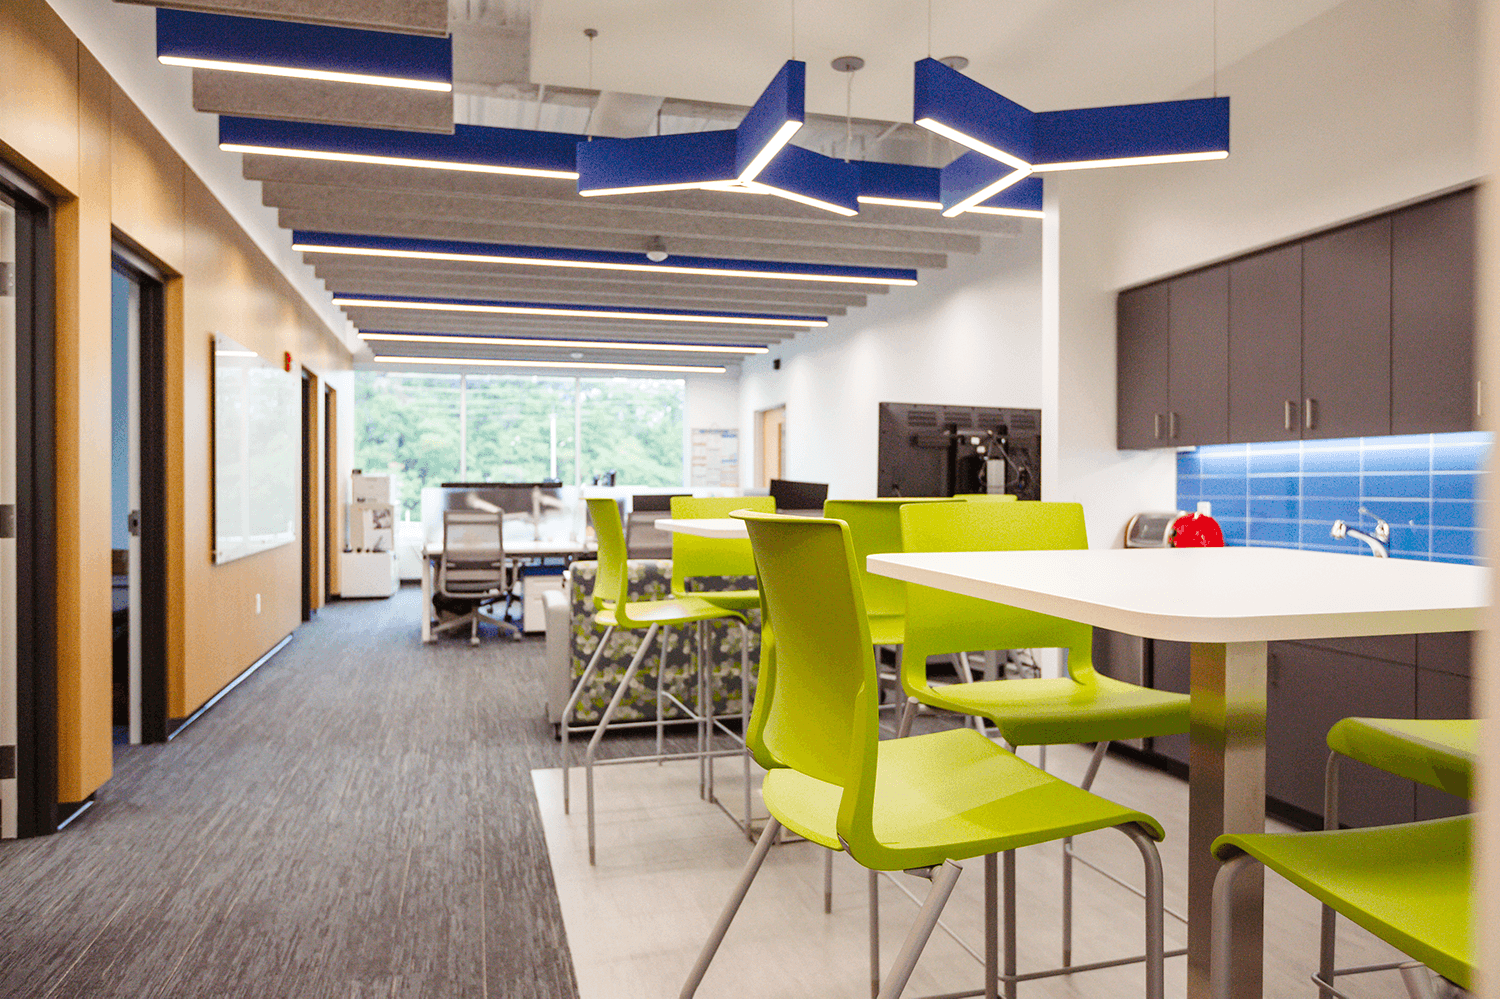 break area with lime green chairs, white tables, and geometric light fixtures